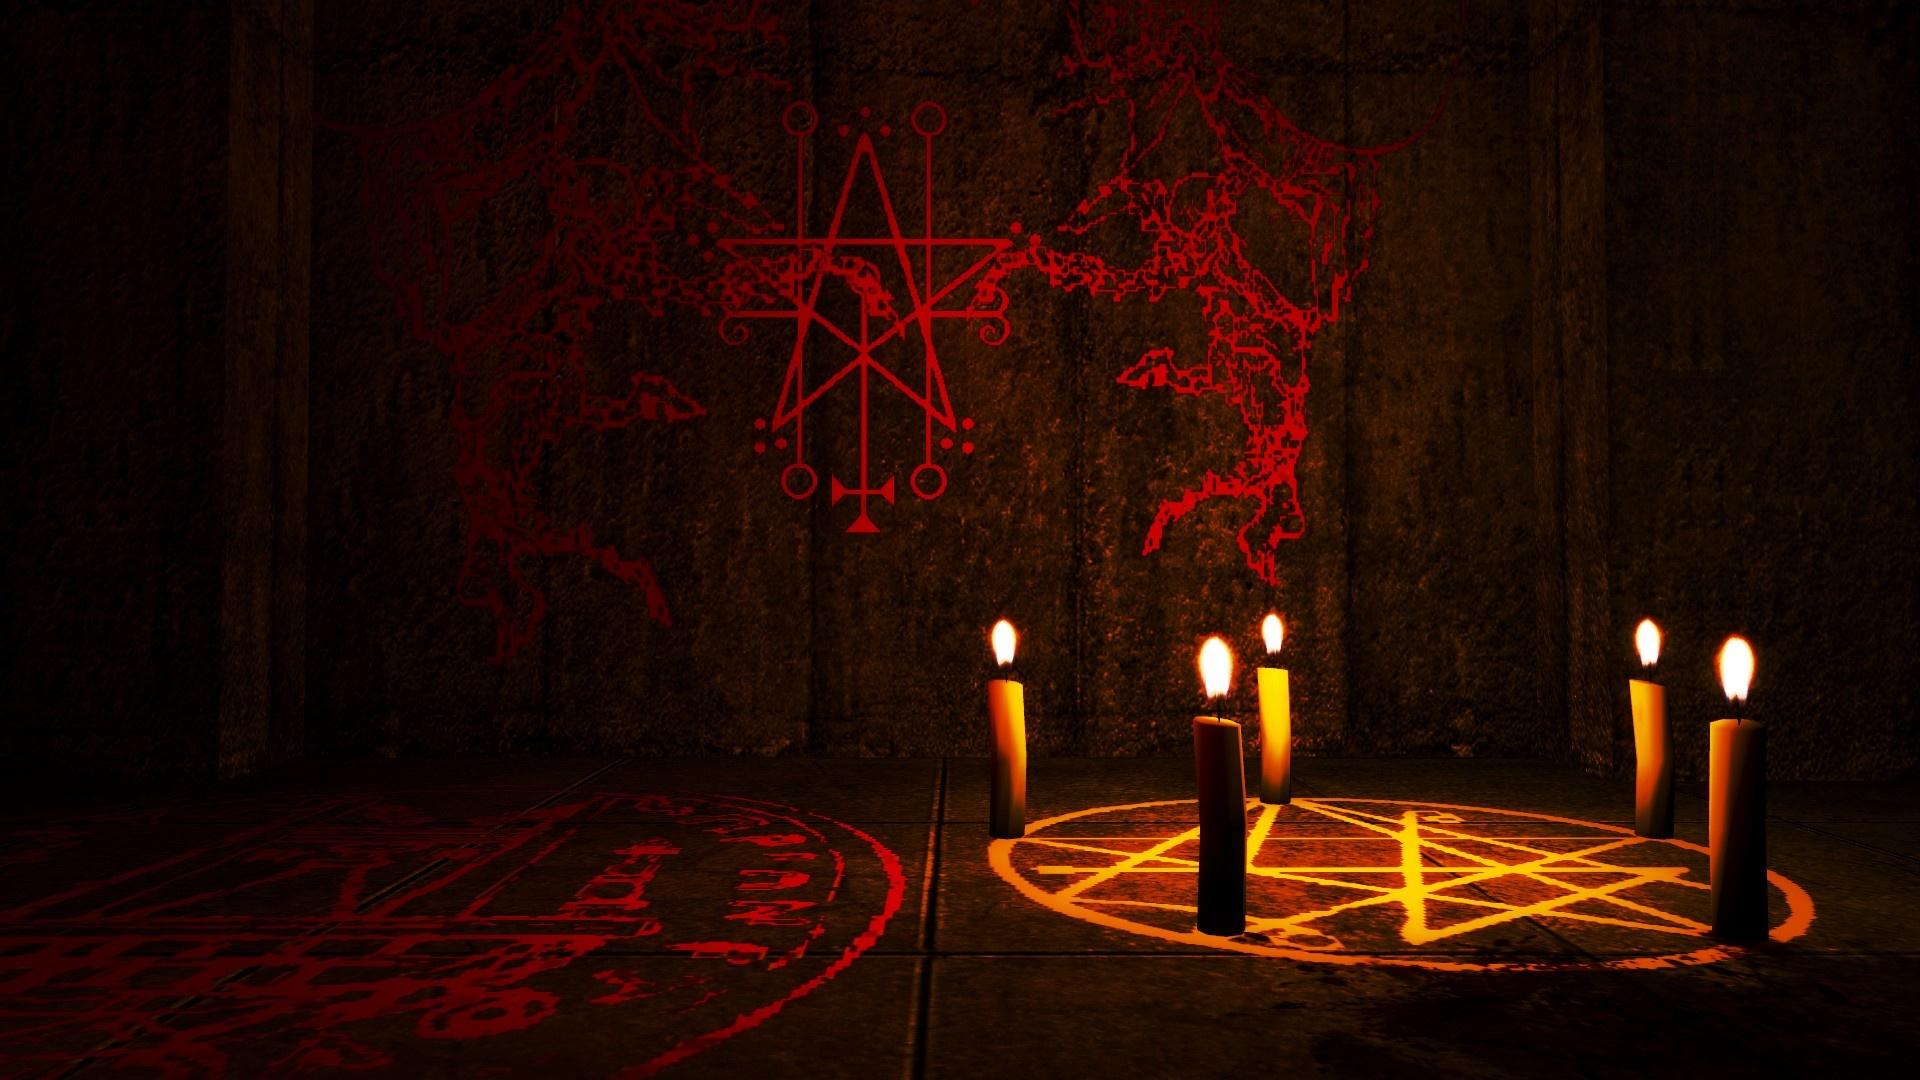 Free download Cult of Cthulhu Occult Windows 8 Wallpaper